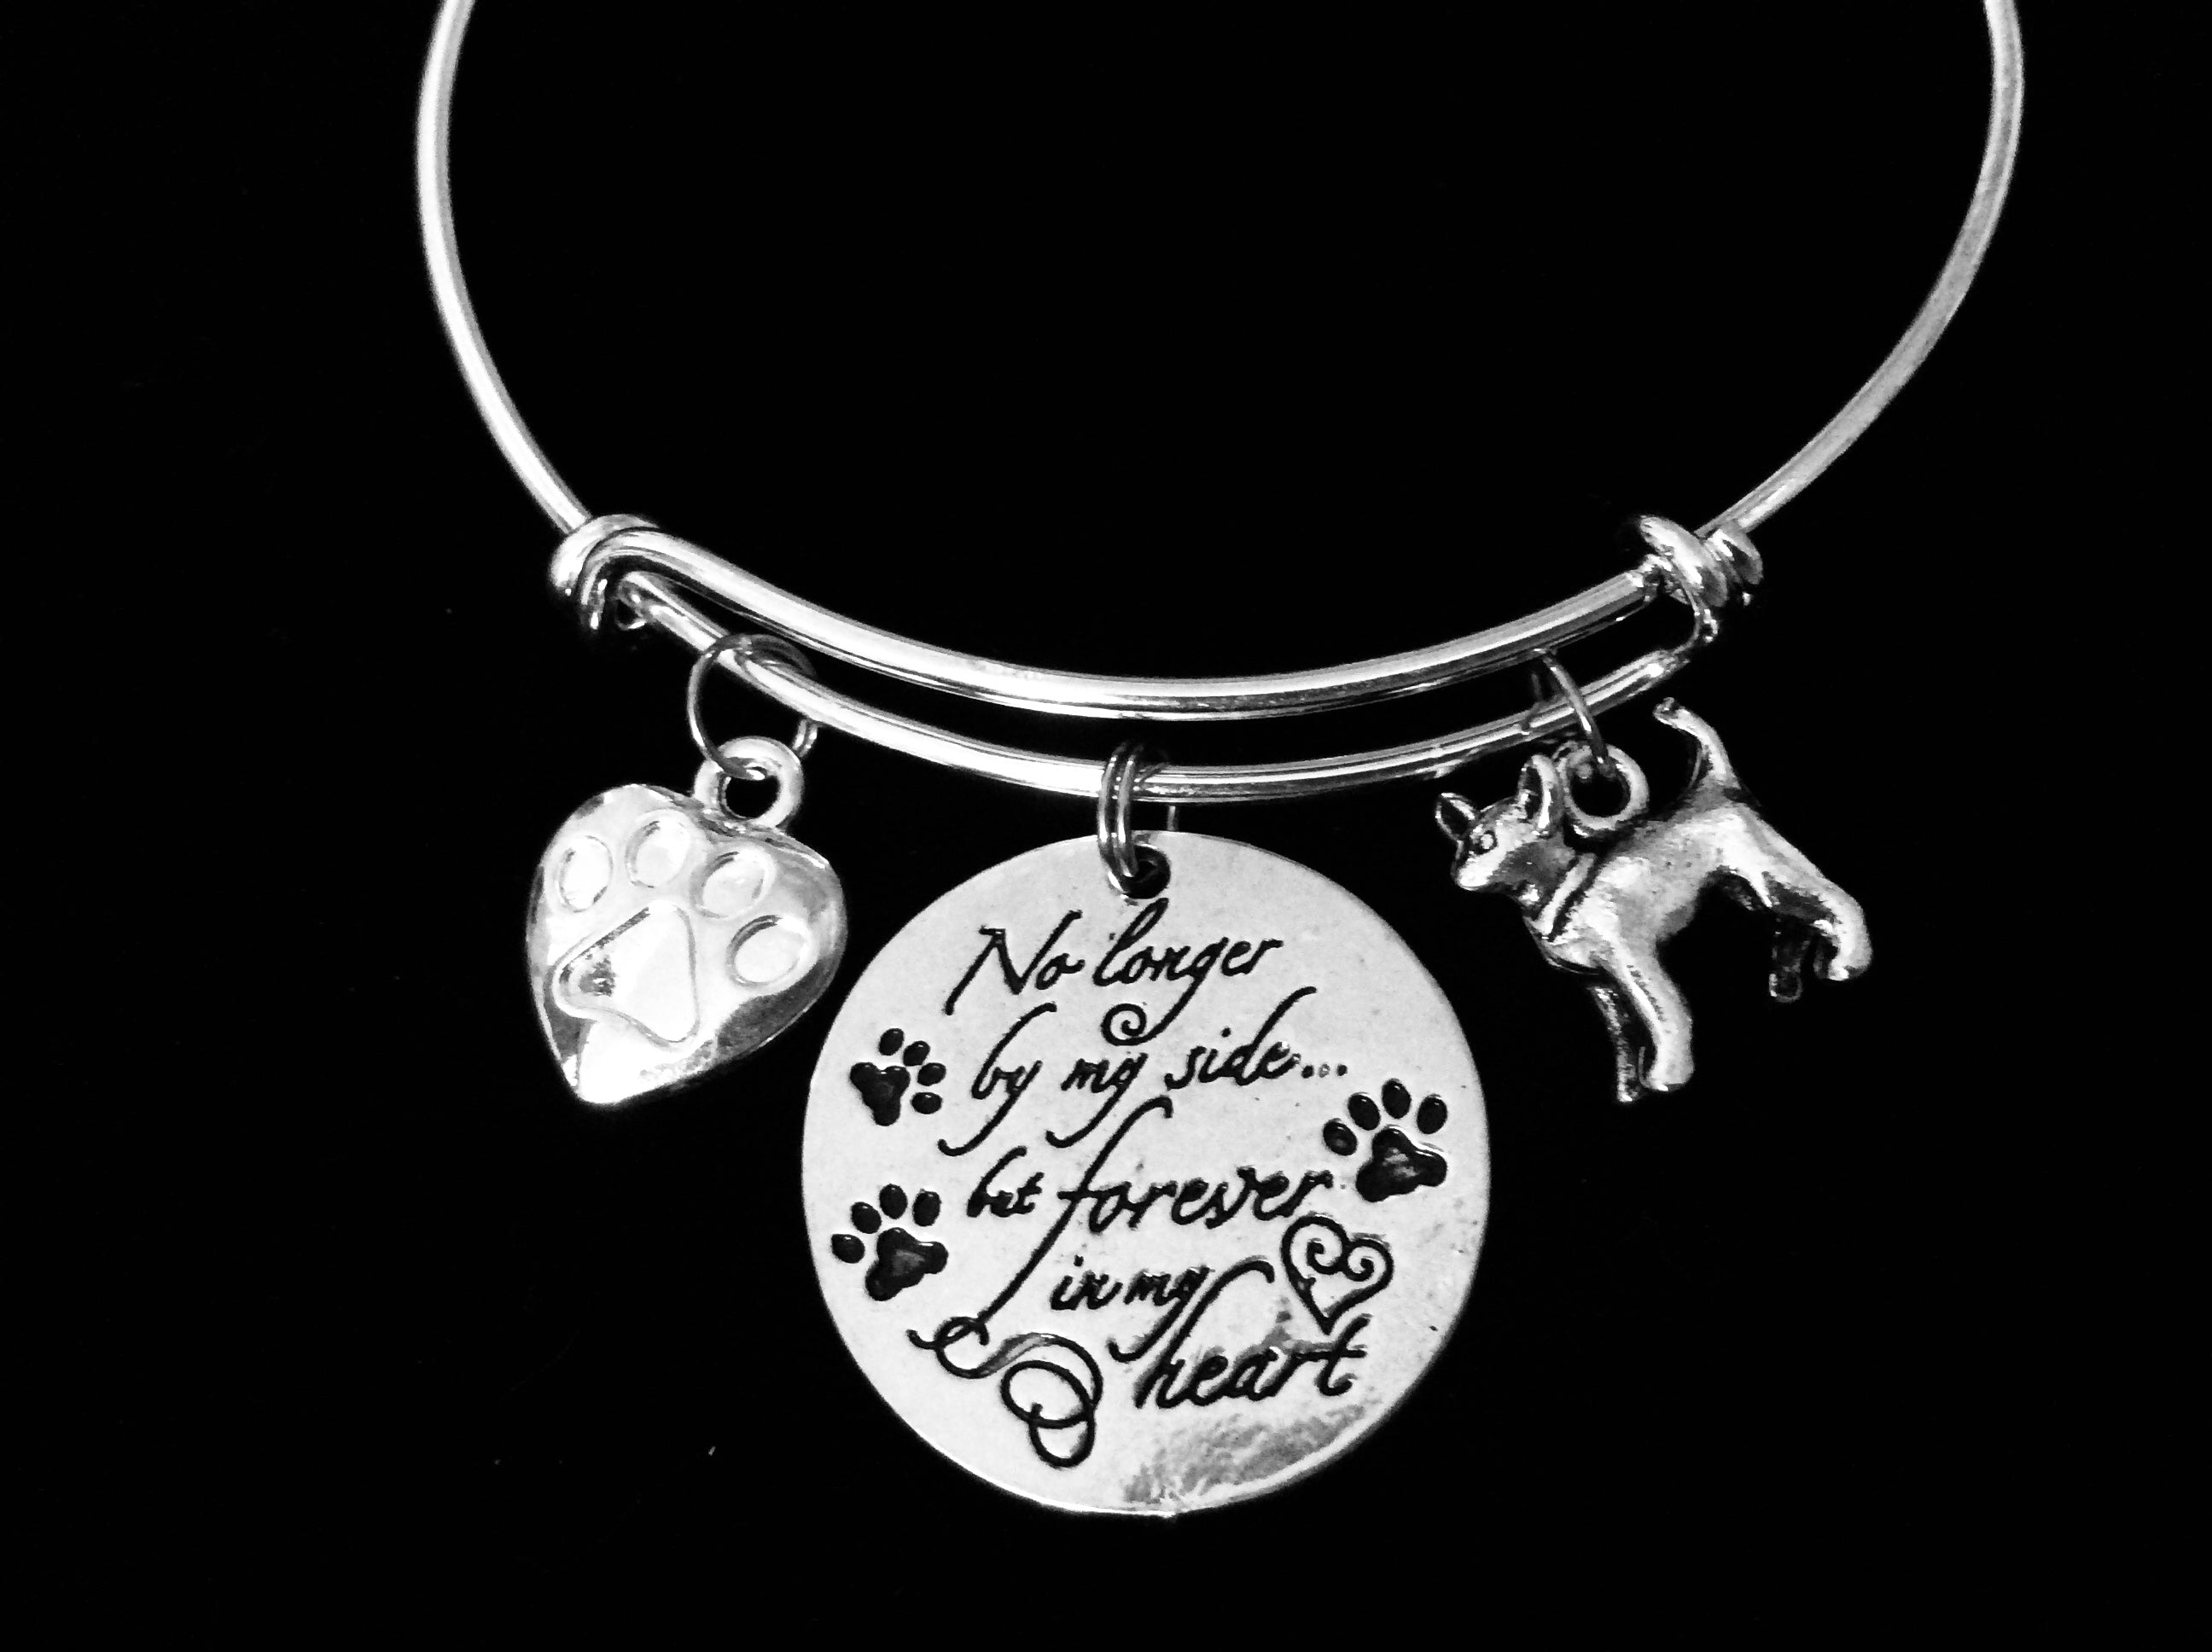 Chihuahua Dog Memorial Jewelry No Longer By My Side but Forever 